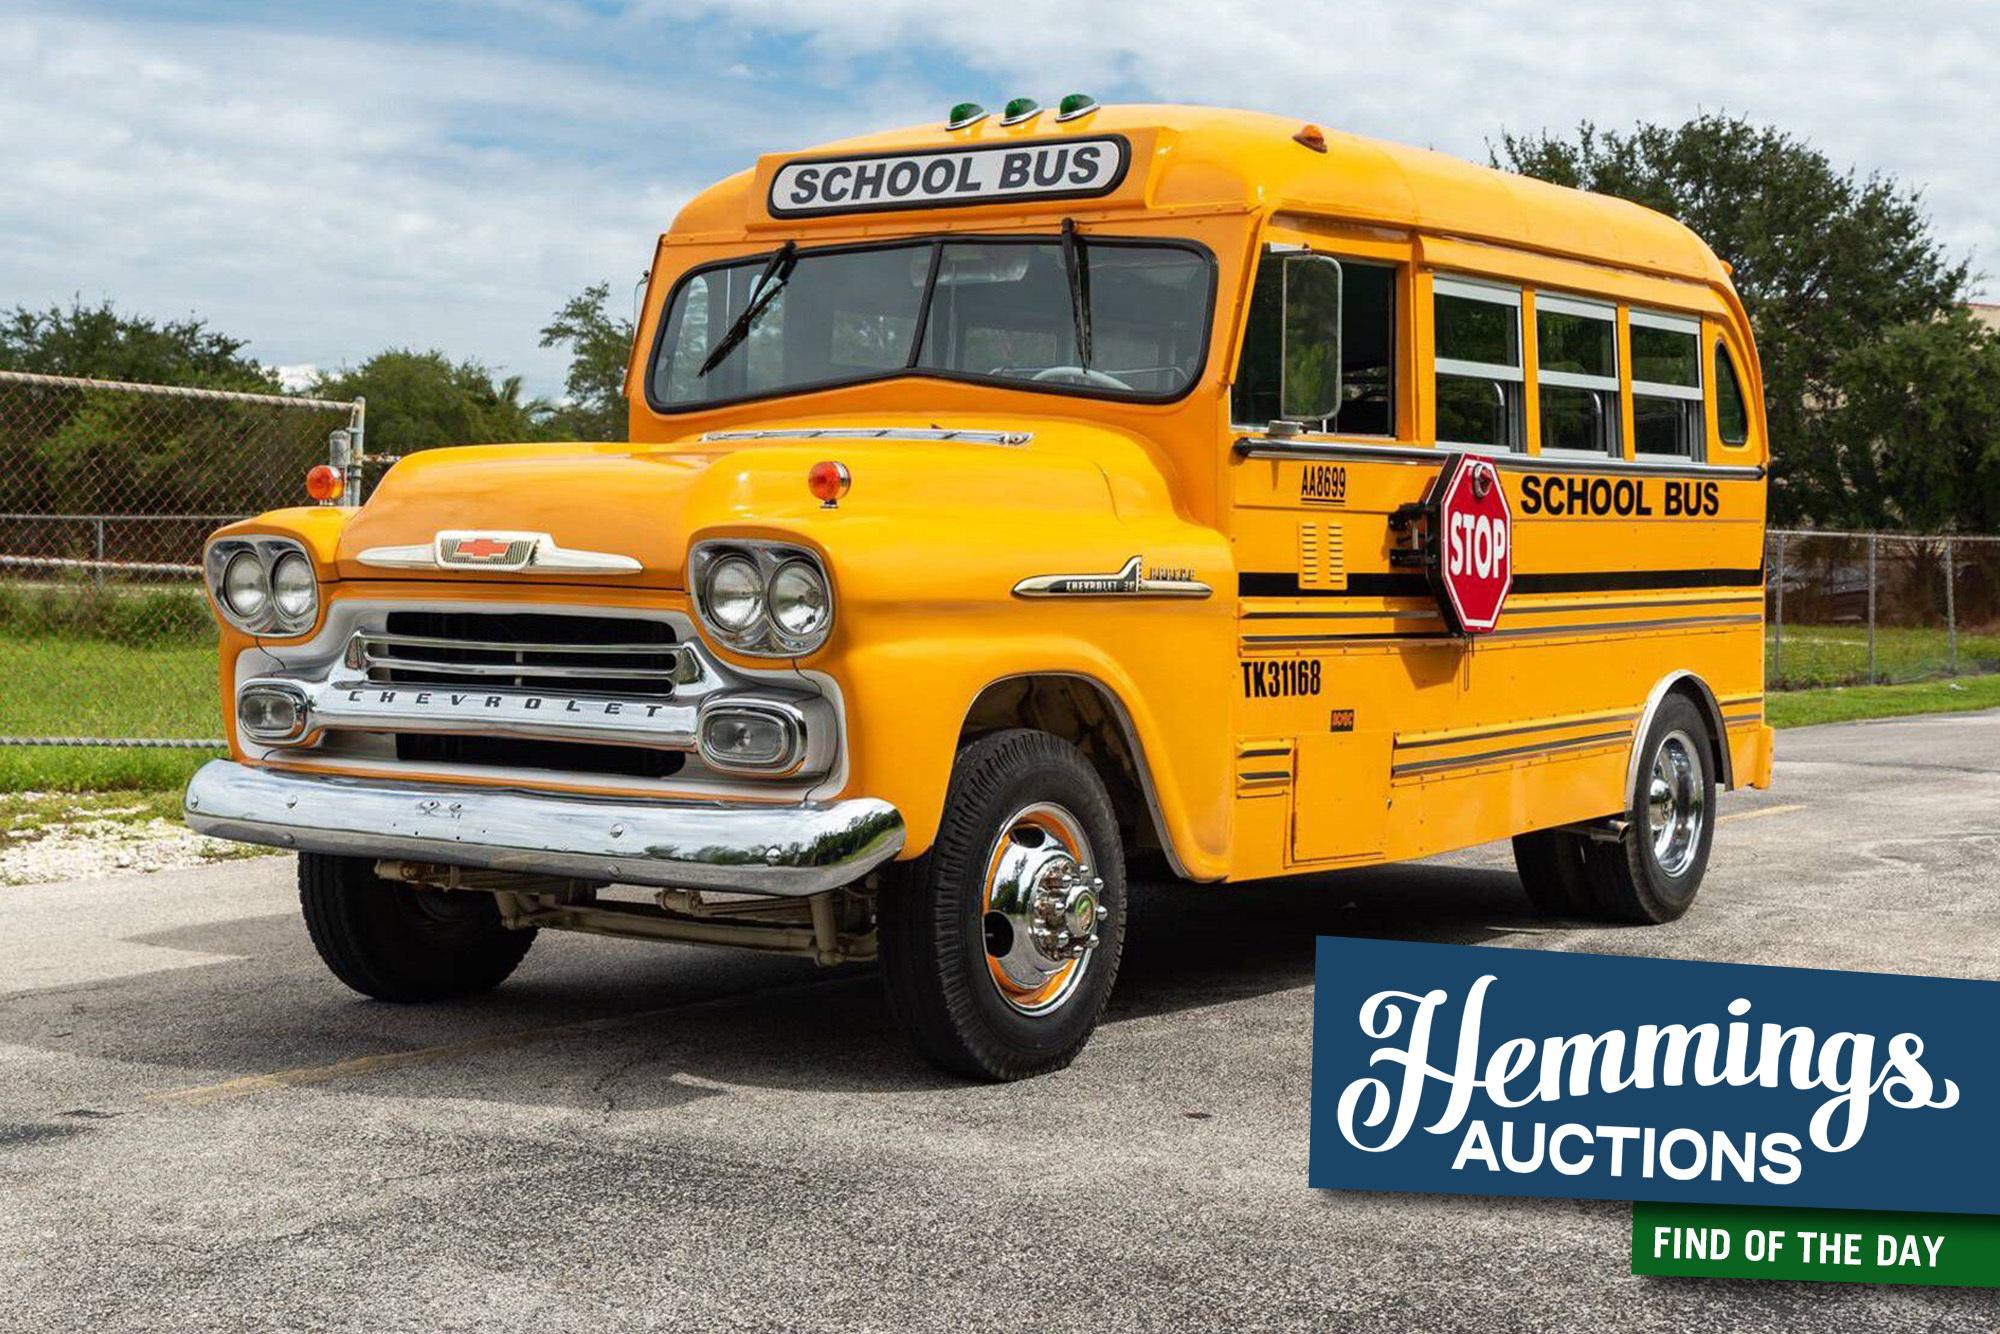 Even with the original Stovebolt six, 1958 Chevrolet Apache school bus is ready for tailgating